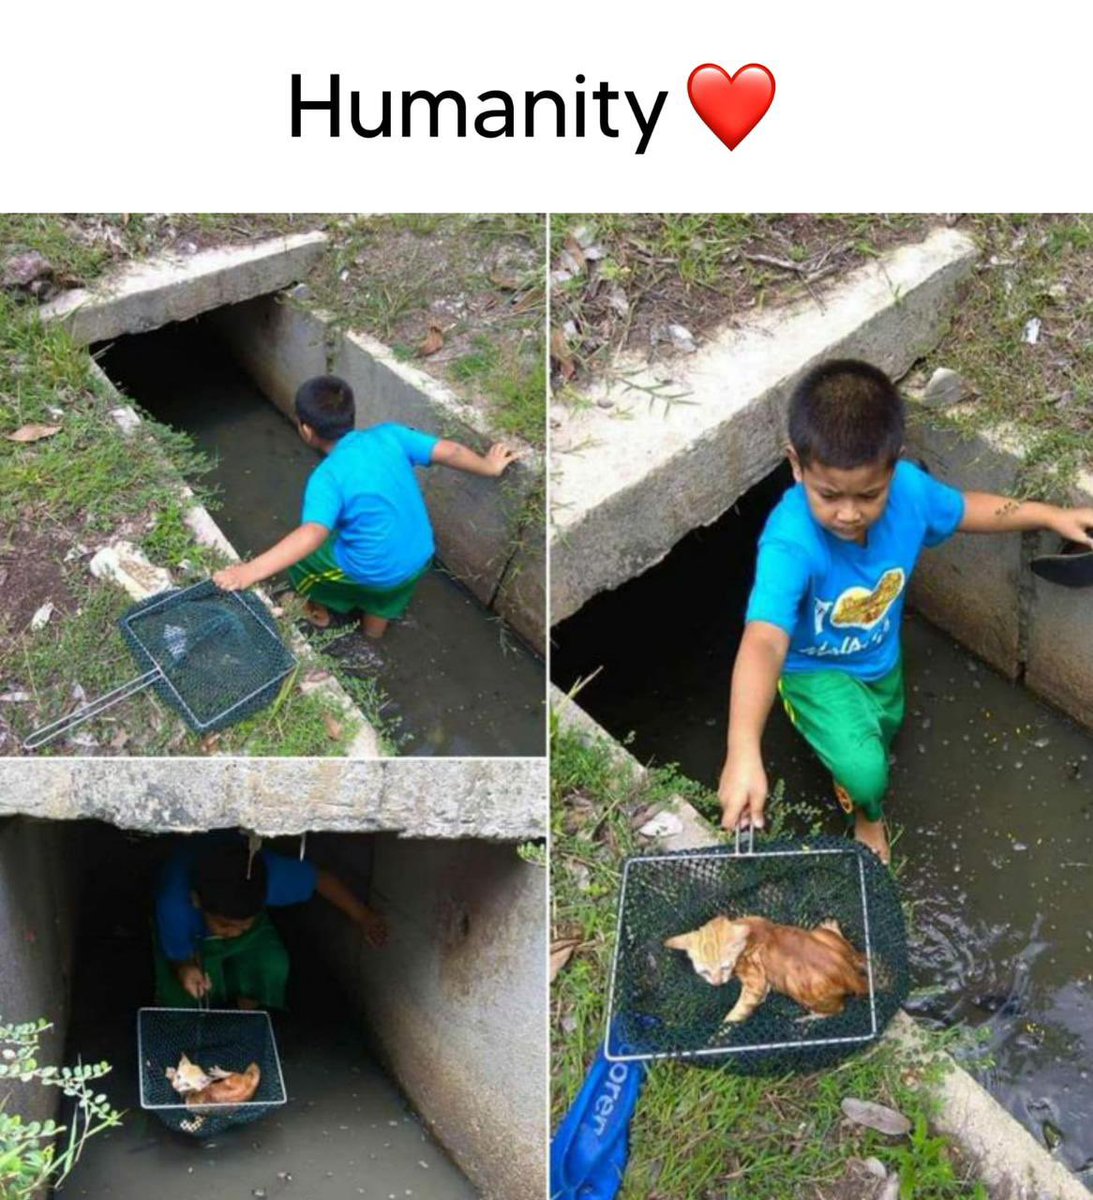 #HumanityPrevails ❤️